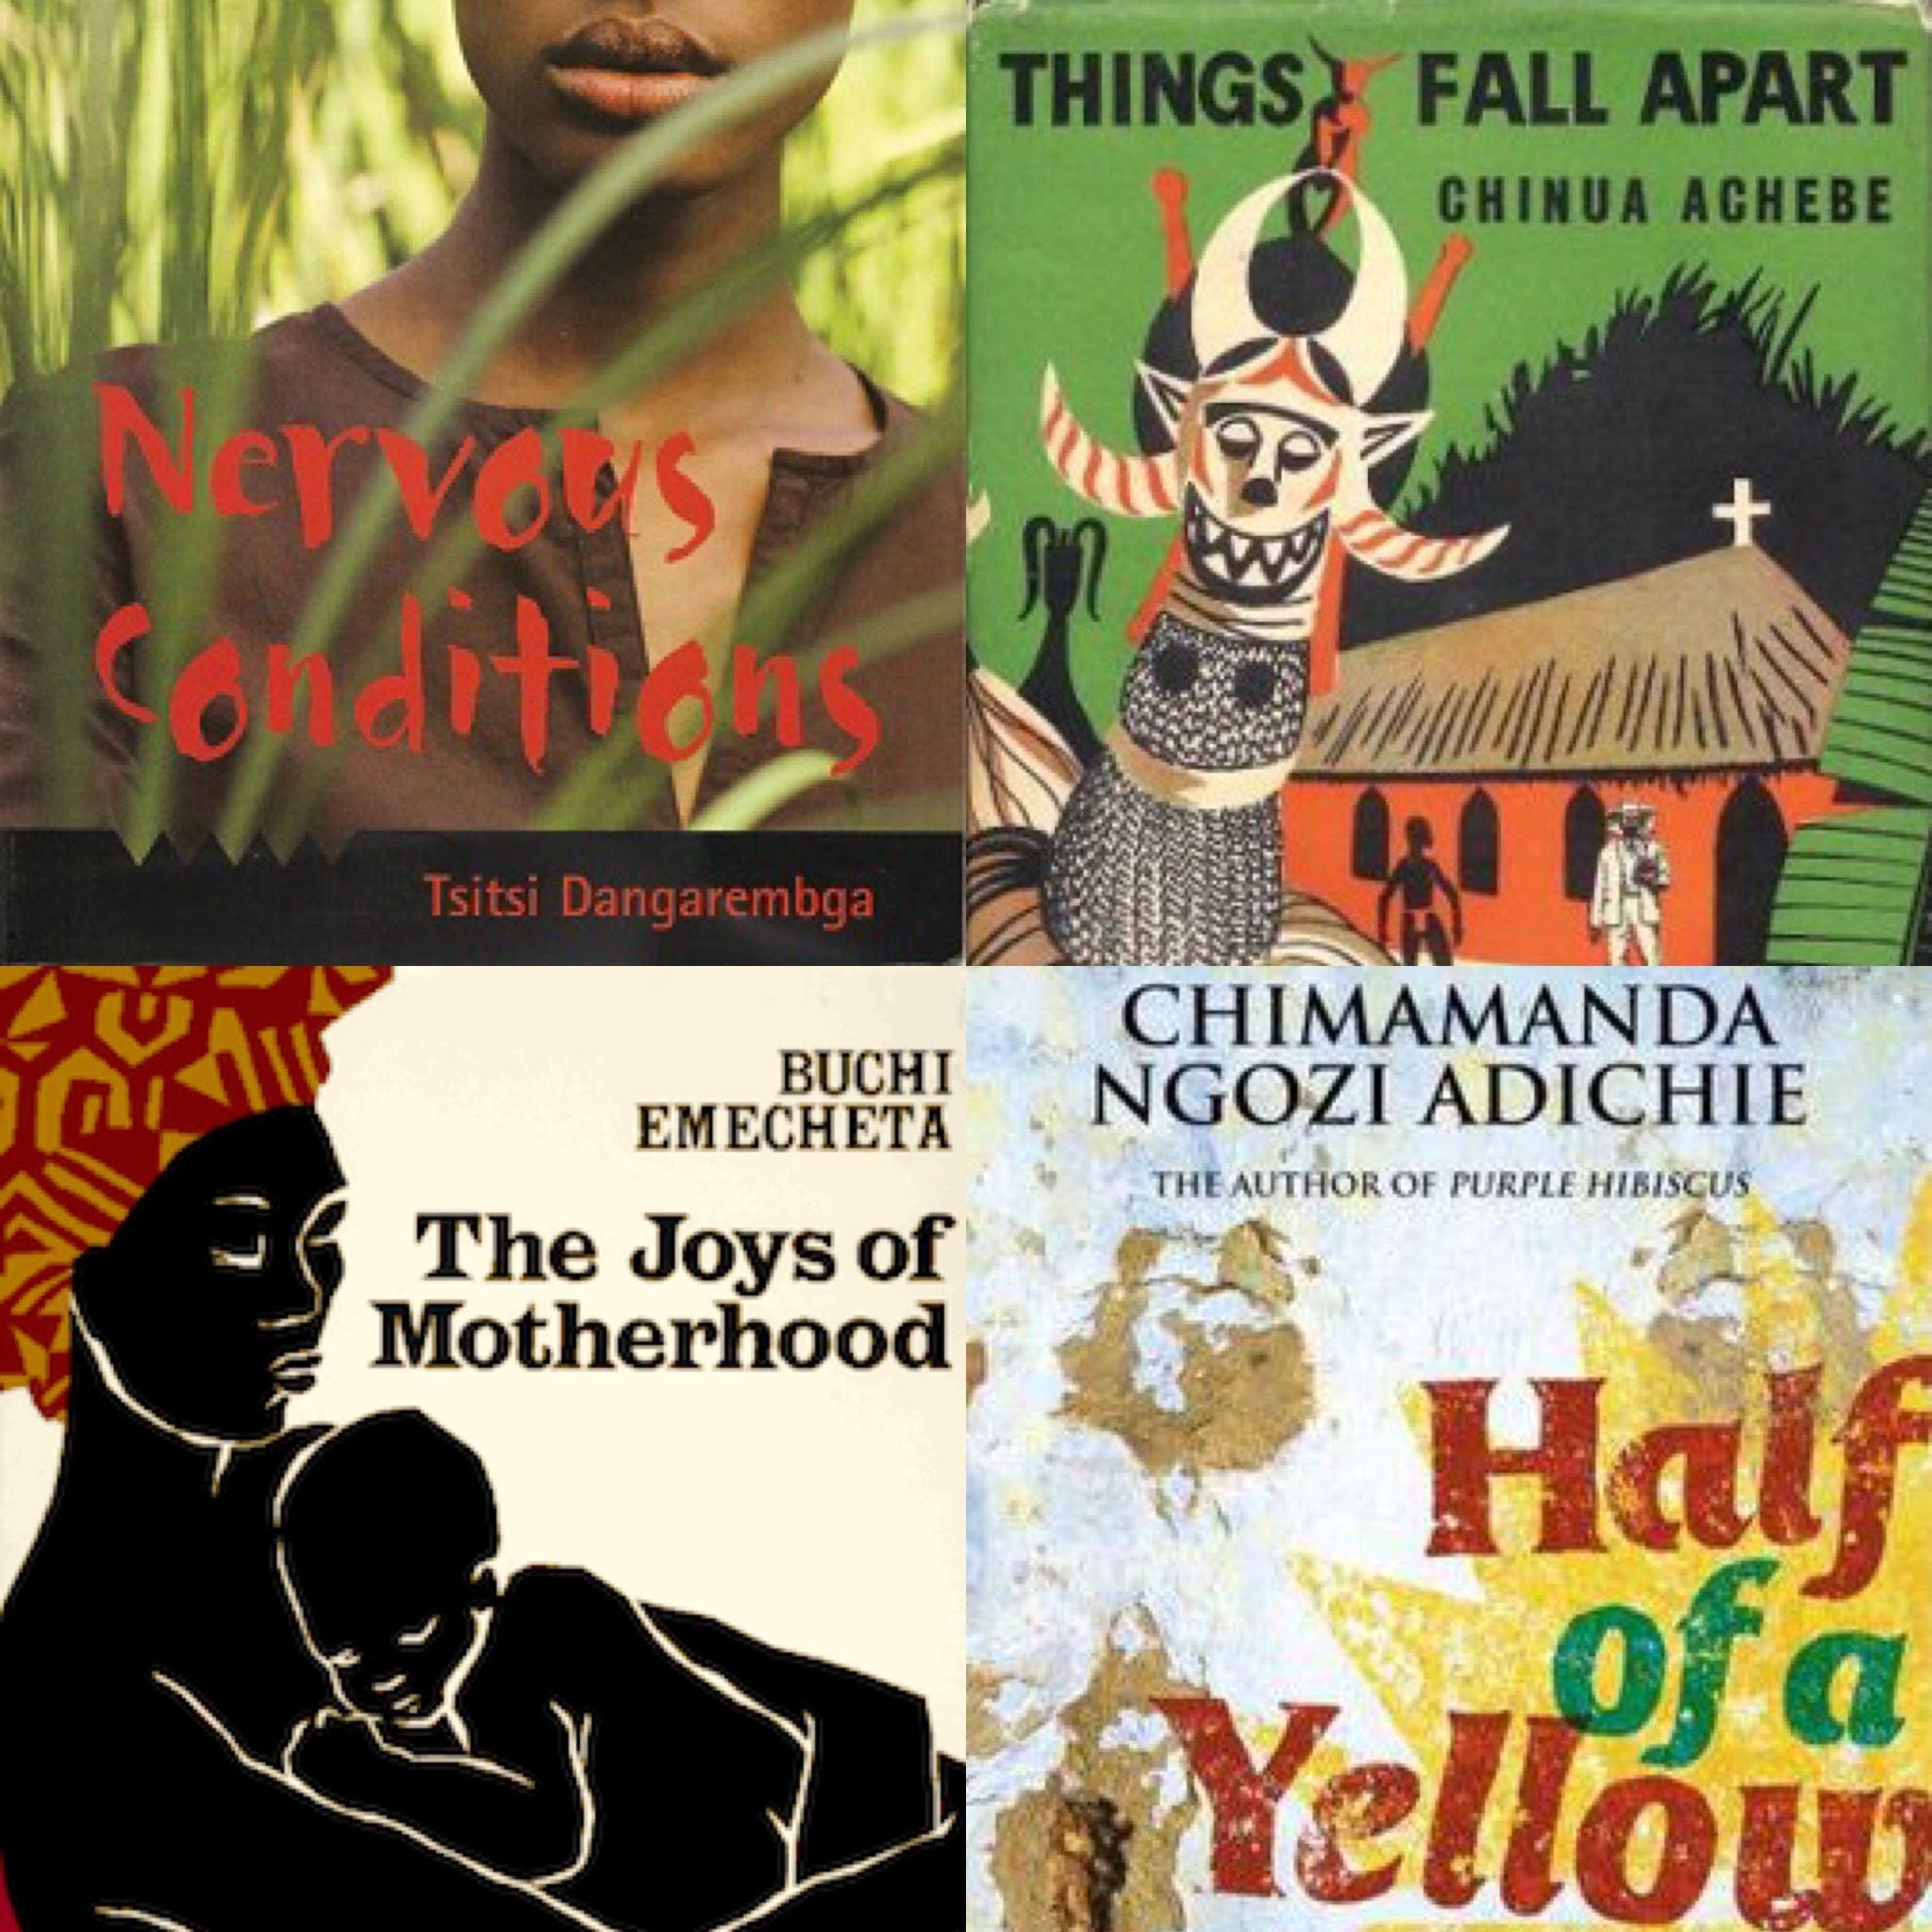 phd topics in african literature